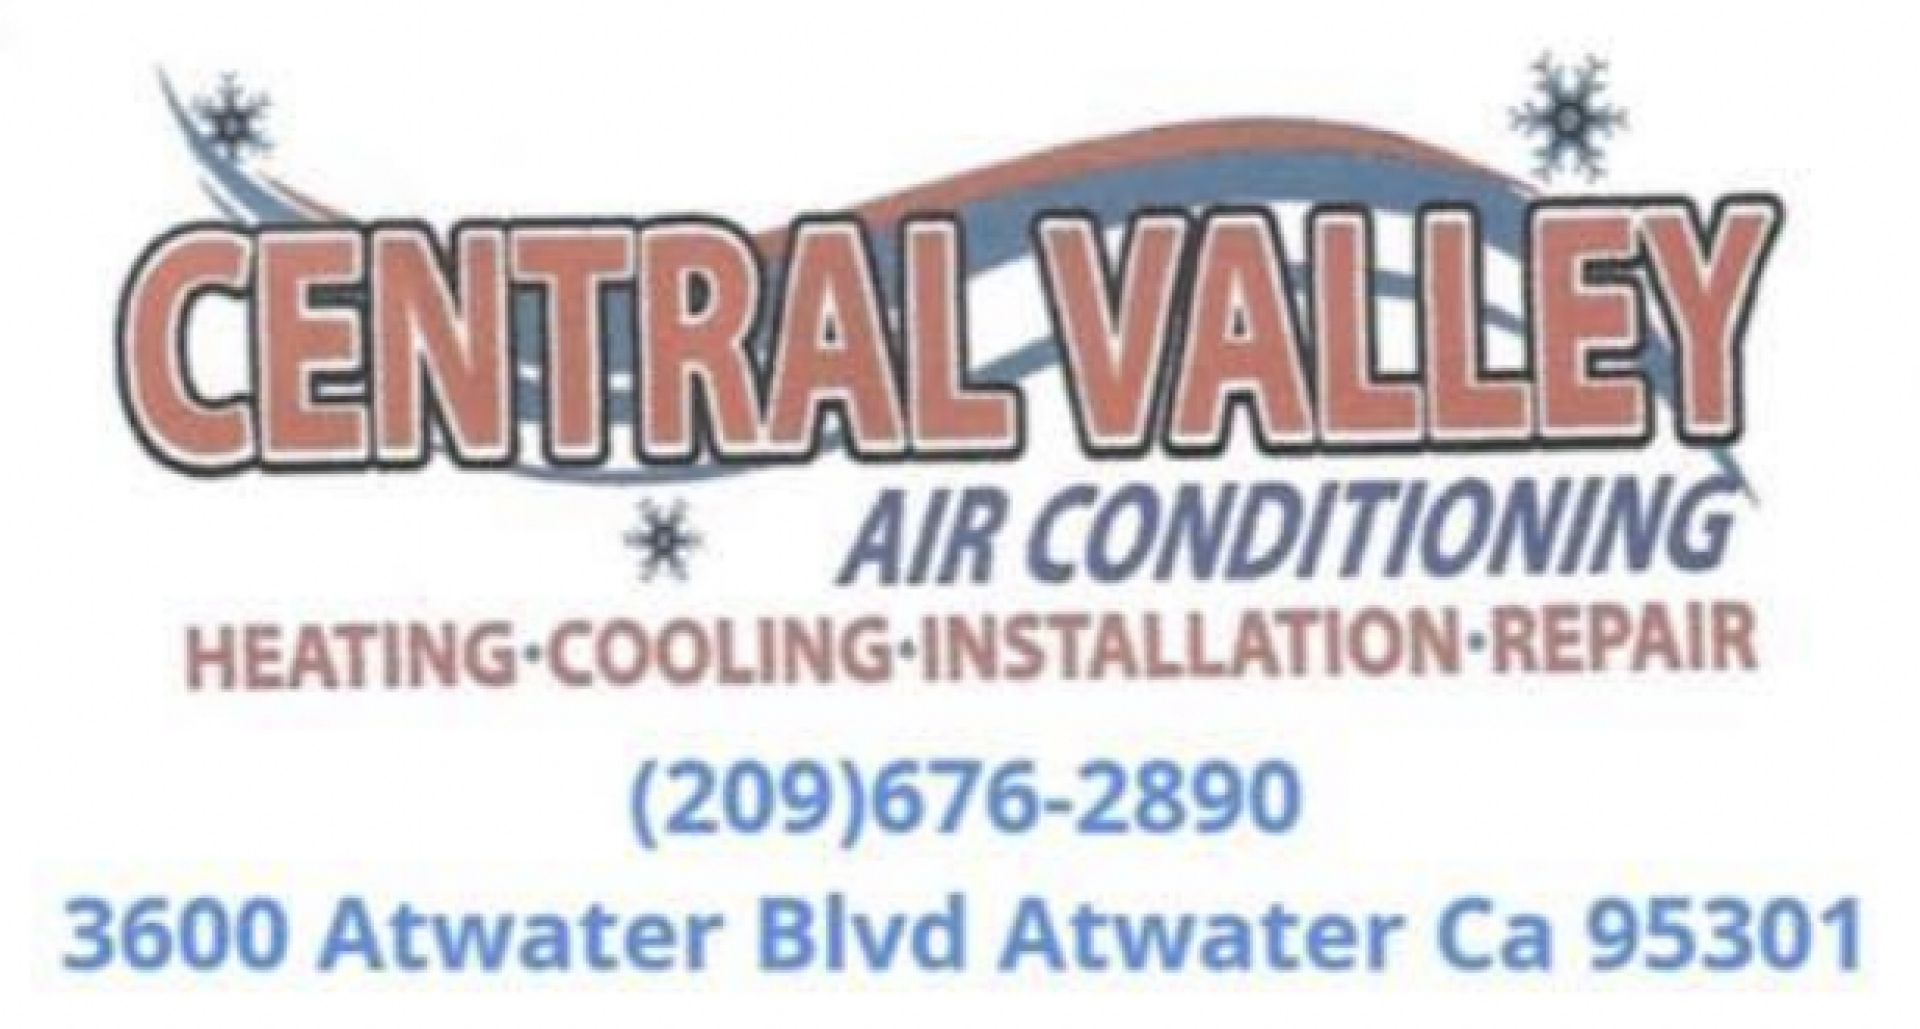 Central Valley Air Conditioning Inc company logo